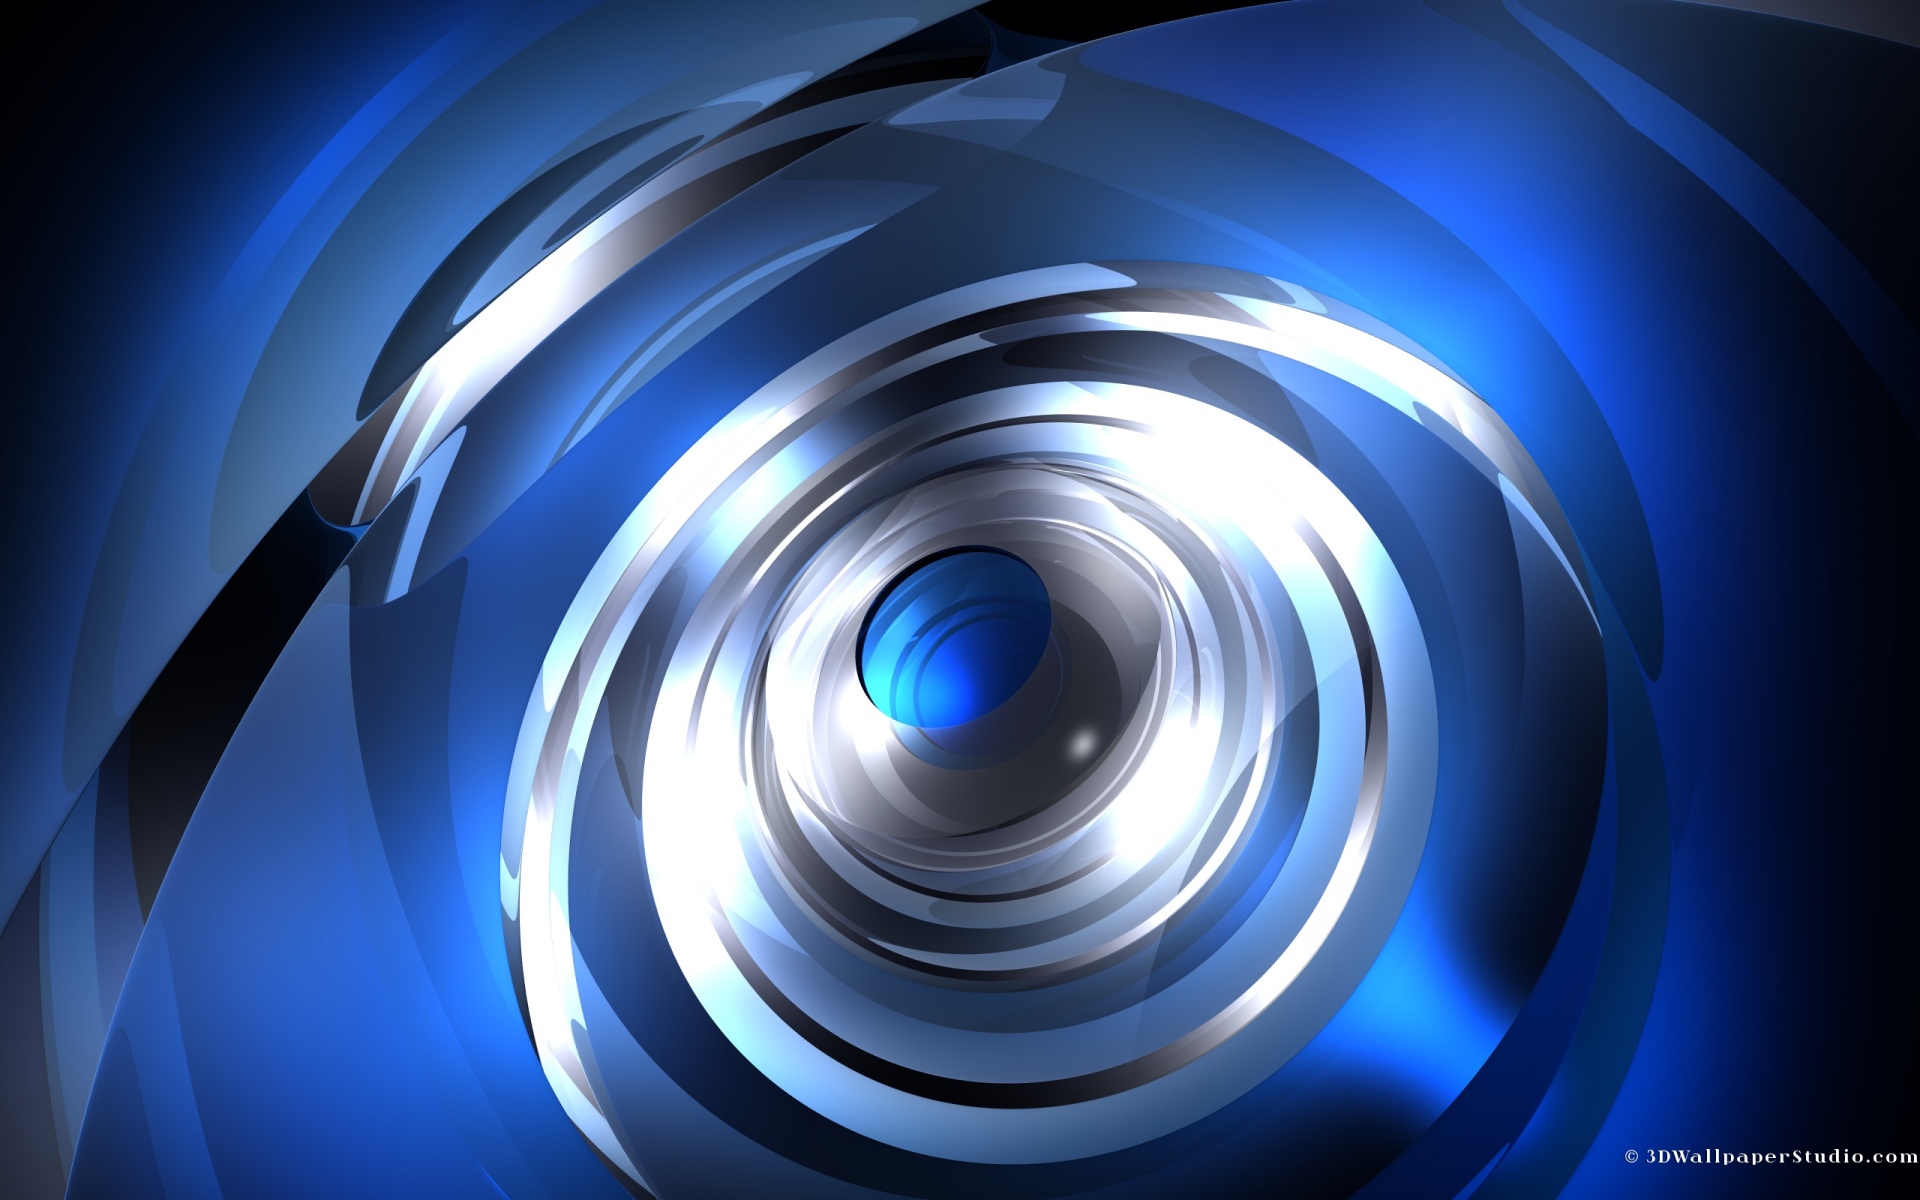 3D Wallpaper Moving blue 3d abstract 1920 x 1200